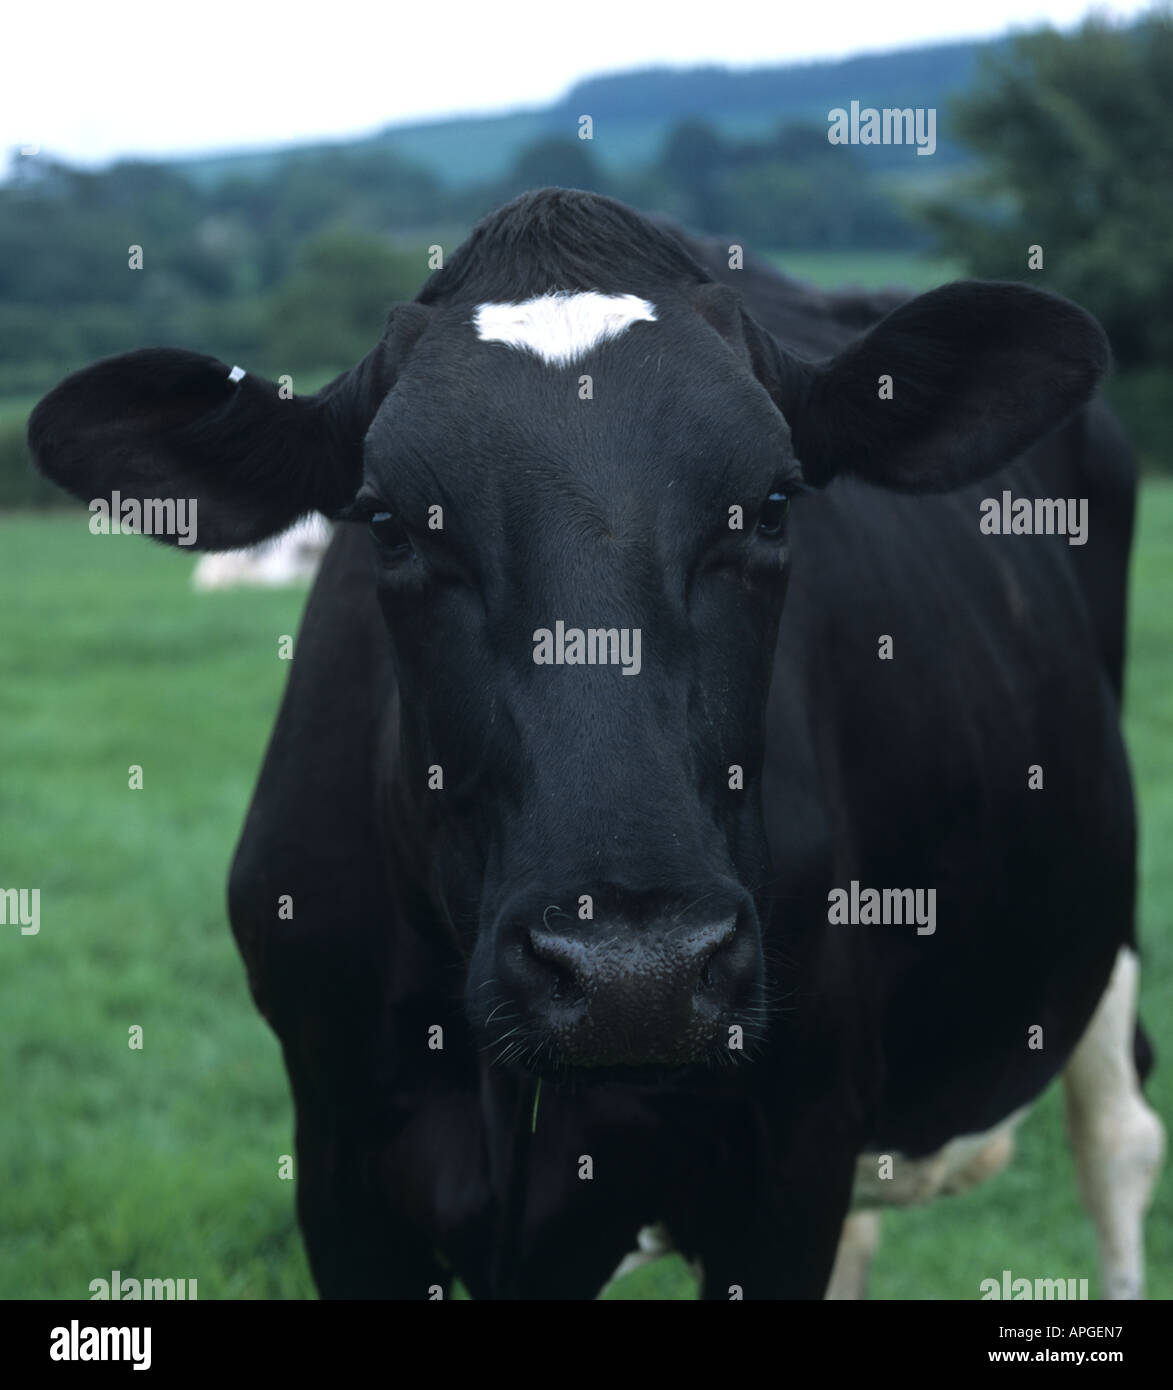 Head of a black faced Holstein Friesian dairy cow Stock Photo